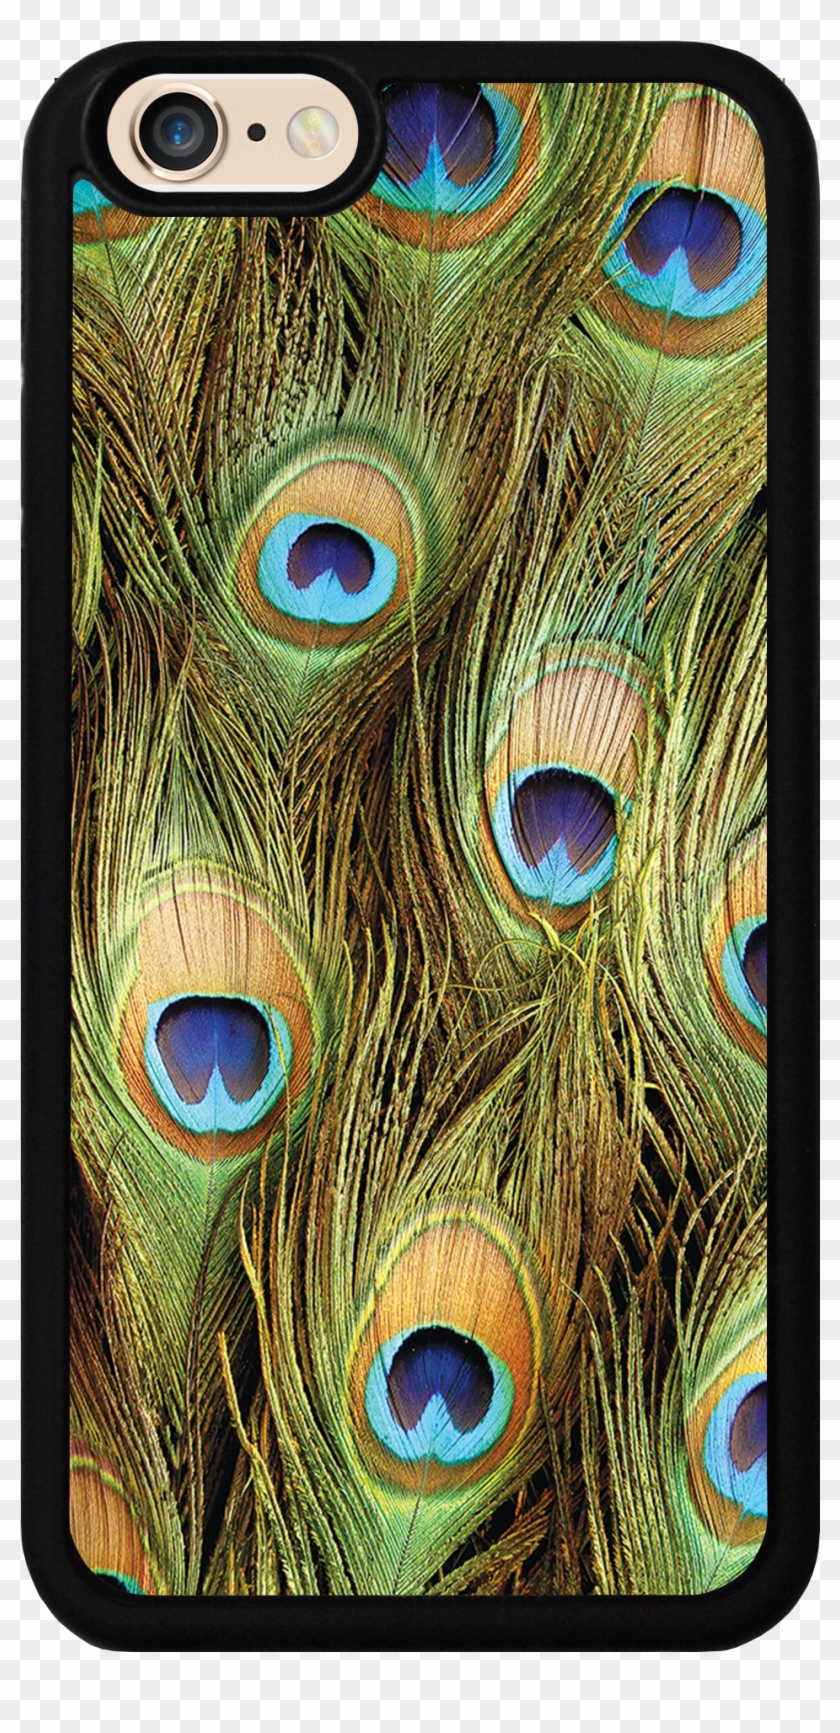 Peacock Feathers Gold Case - Mobile Phone Case Clipart #1102434